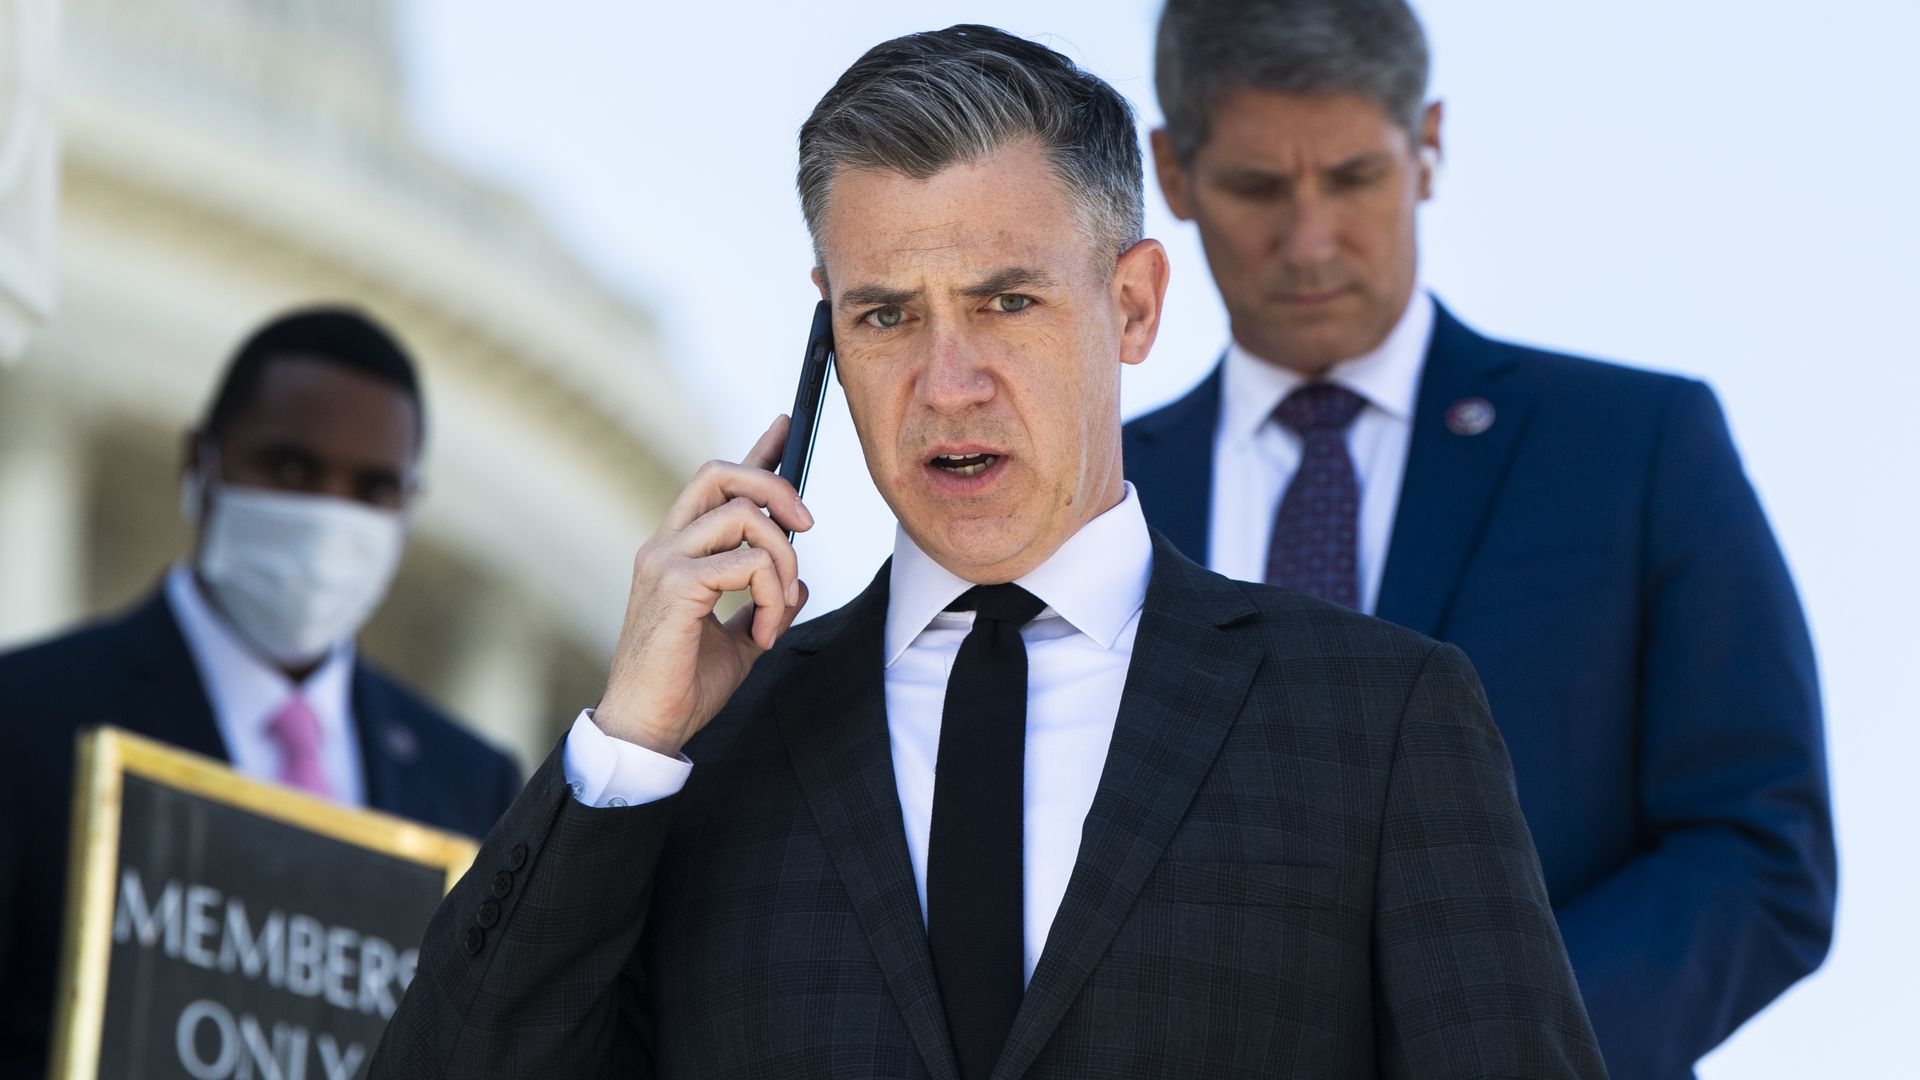 Rep. Jim Banks is seen speaking on a cellphone.